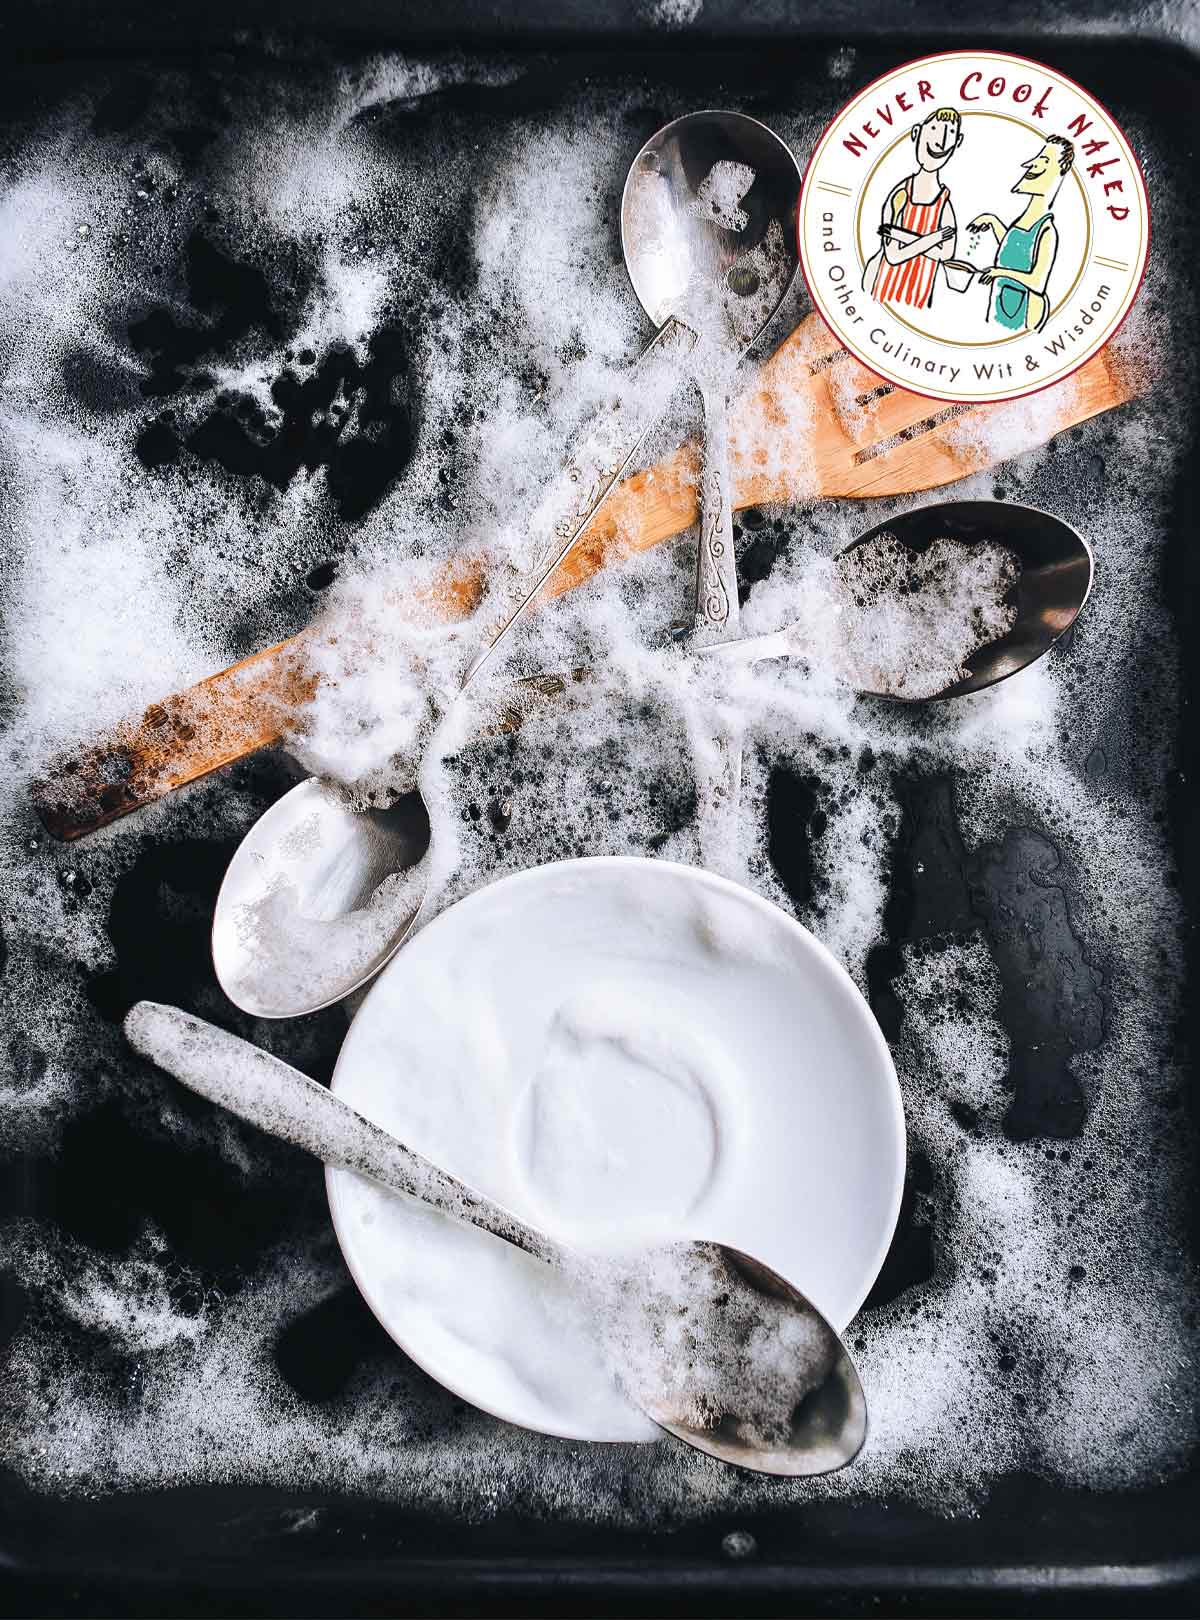 4 silver spoons, a wooden spatula, and a white saucer all covered with suds.